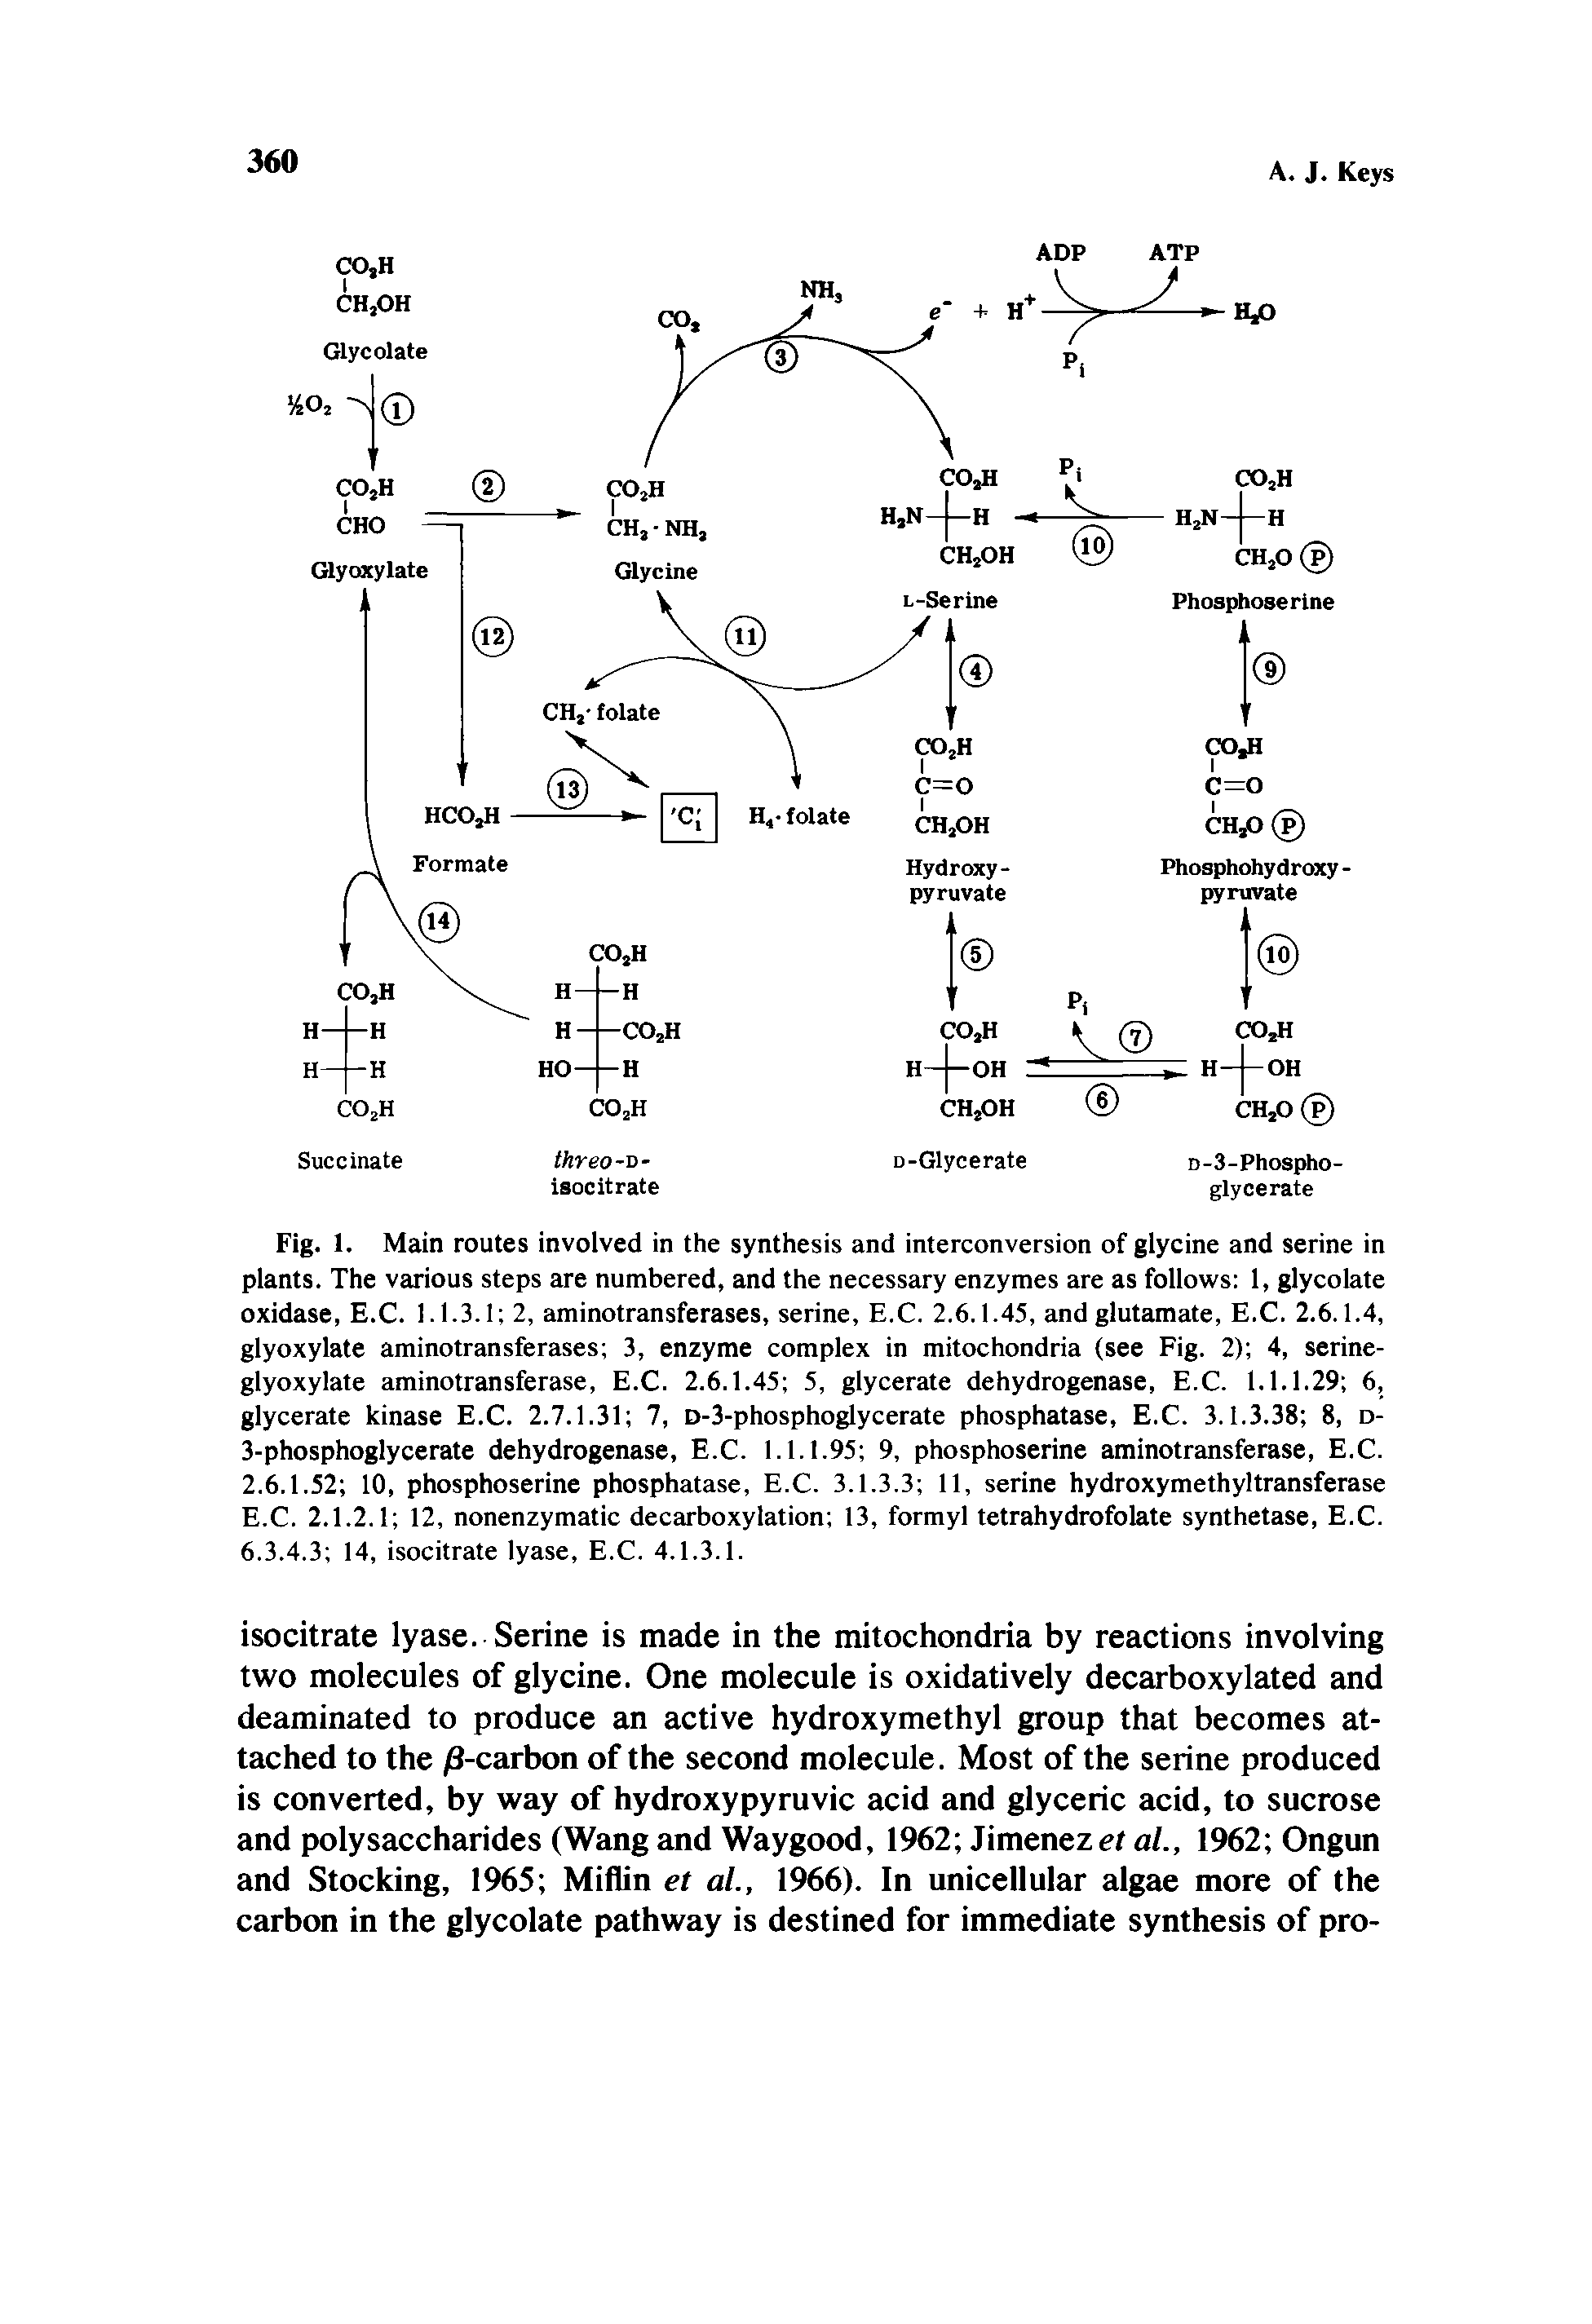 Fig. 1. Main routes involved in the synthesis and interconversion of glycine and serine in plants. The various steps are numbered, and the necessary enzymes are as follows 1, glycolate oxidase, E.C. 1.1.3.1 2, aminotransferases, serine, E.C. 2.6.1.45, and glutamate, E.C. 2.6.1.4, glyoxylate aminotransferases 3, enzyme complex in mitochondria (see Fig. 2) 4, serine-glyoxylate aminotransferase, E.C. 2.6.1.45 5, glycerate dehydrogenase, E.C. 1.1.1.29 6, glycerate kinase E.C. 2.7.1.31 7, D-3-phosphoglycerate phosphatase, E.C. 3.1.3.38 8, d-3-phosphoglycerate dehydrogenase, E.C. 1.1.1.95 9, phosphoserine aminotransferase, E.C. 2.6.1.52 10, phosphoserine phosphatase, E.C. 3.1.3.3 11, serine hydroxymethyltransferase E.C. 2.1.2.1 12, nonenzymatic decarboxylation 13, formyl tetrahydrofolate synthetase, E.C. 6.3.4.3 14, isocitrate iyase, E.C. 4.1.3.1.